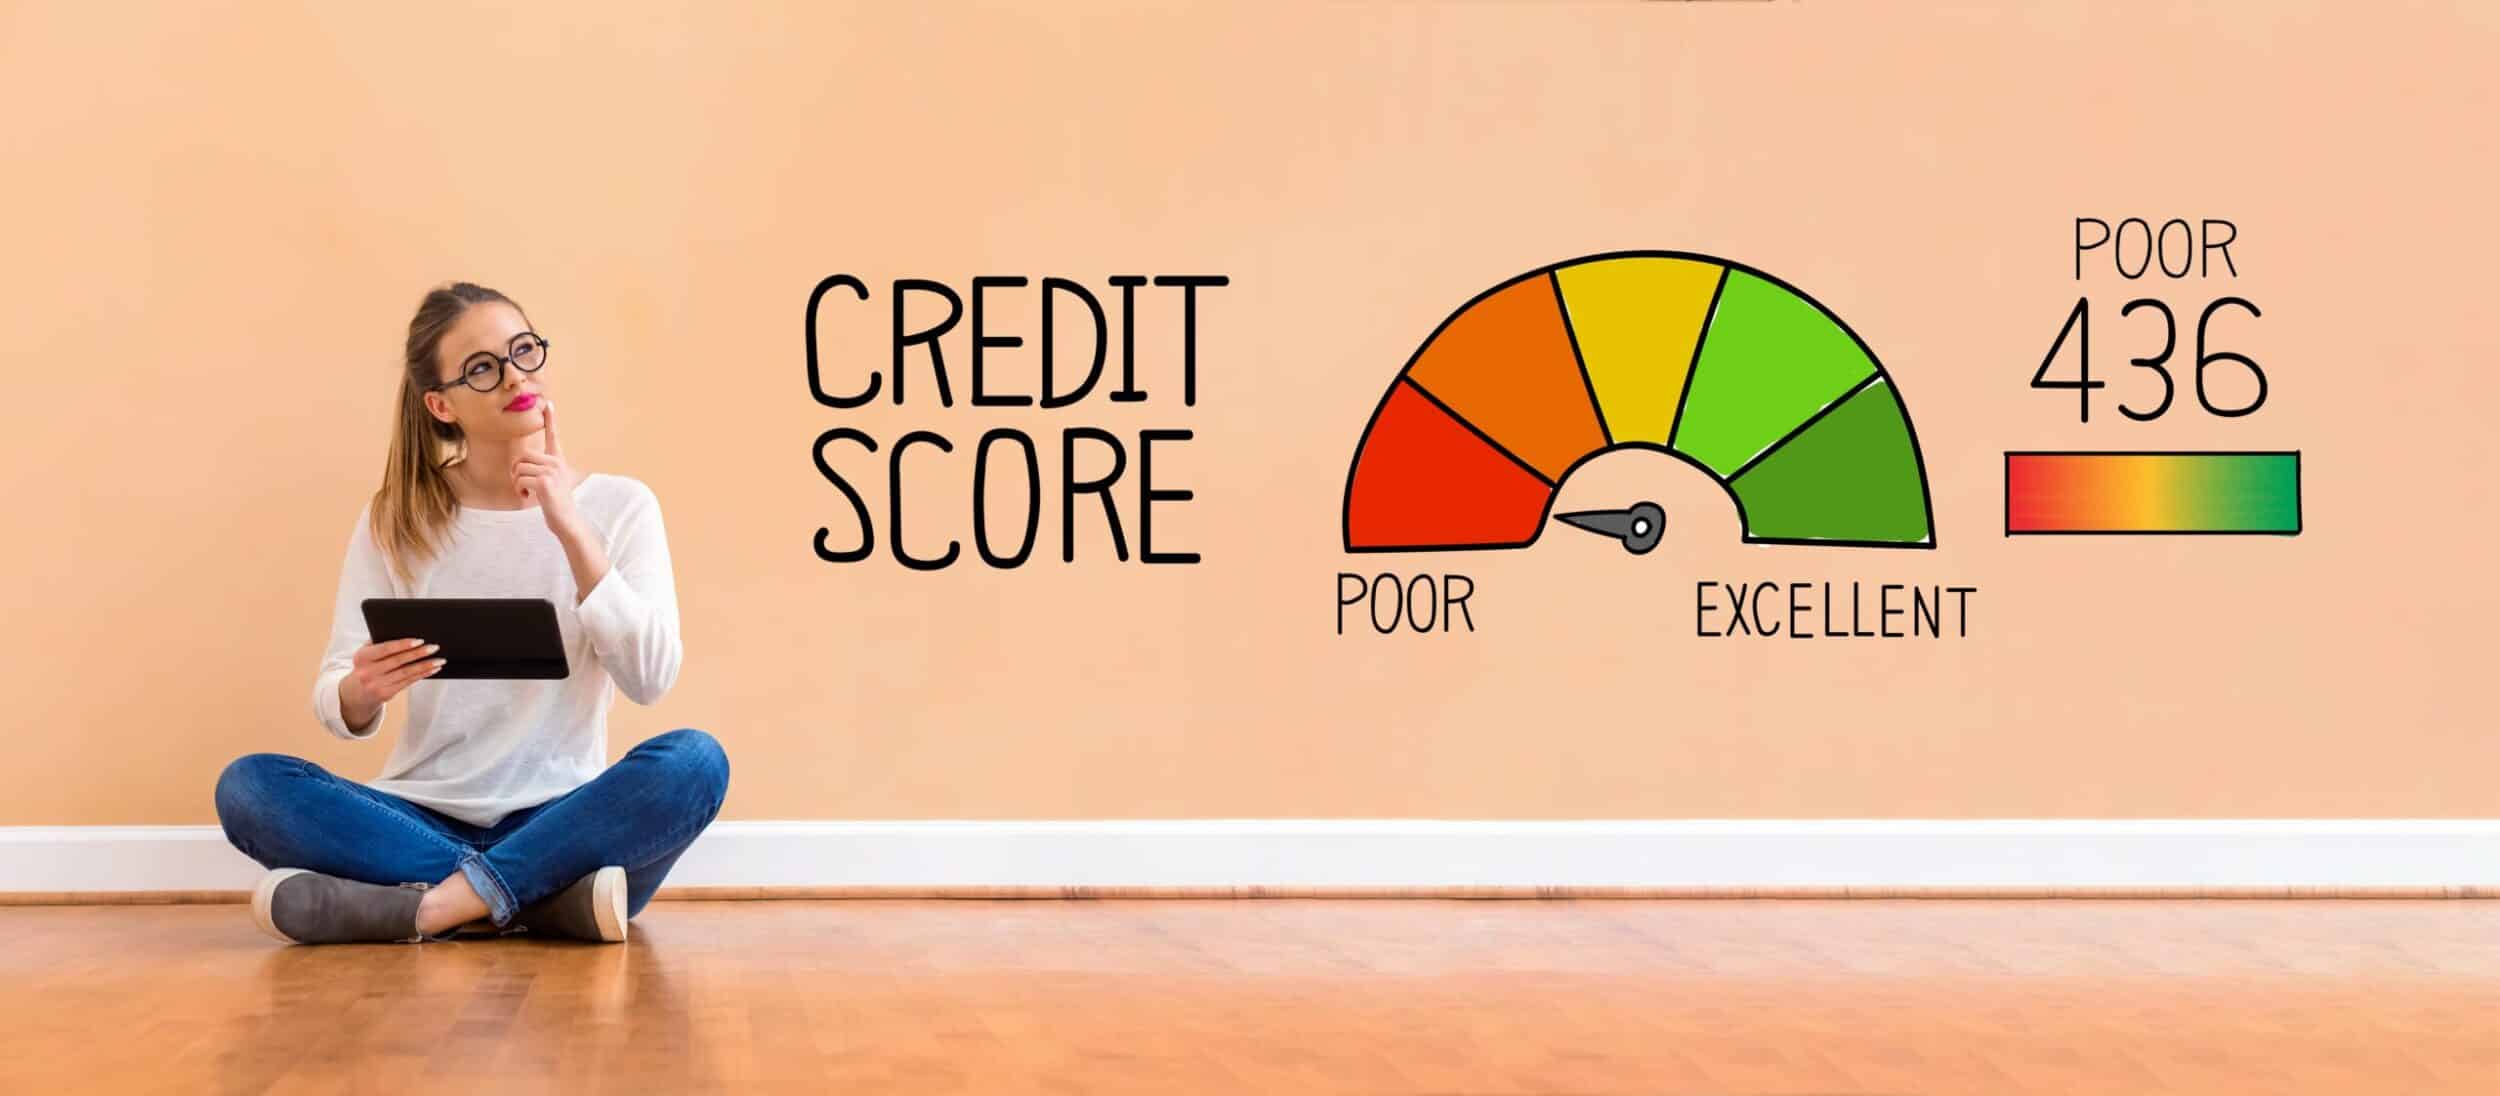 refinance a mortgage with a poor credit score